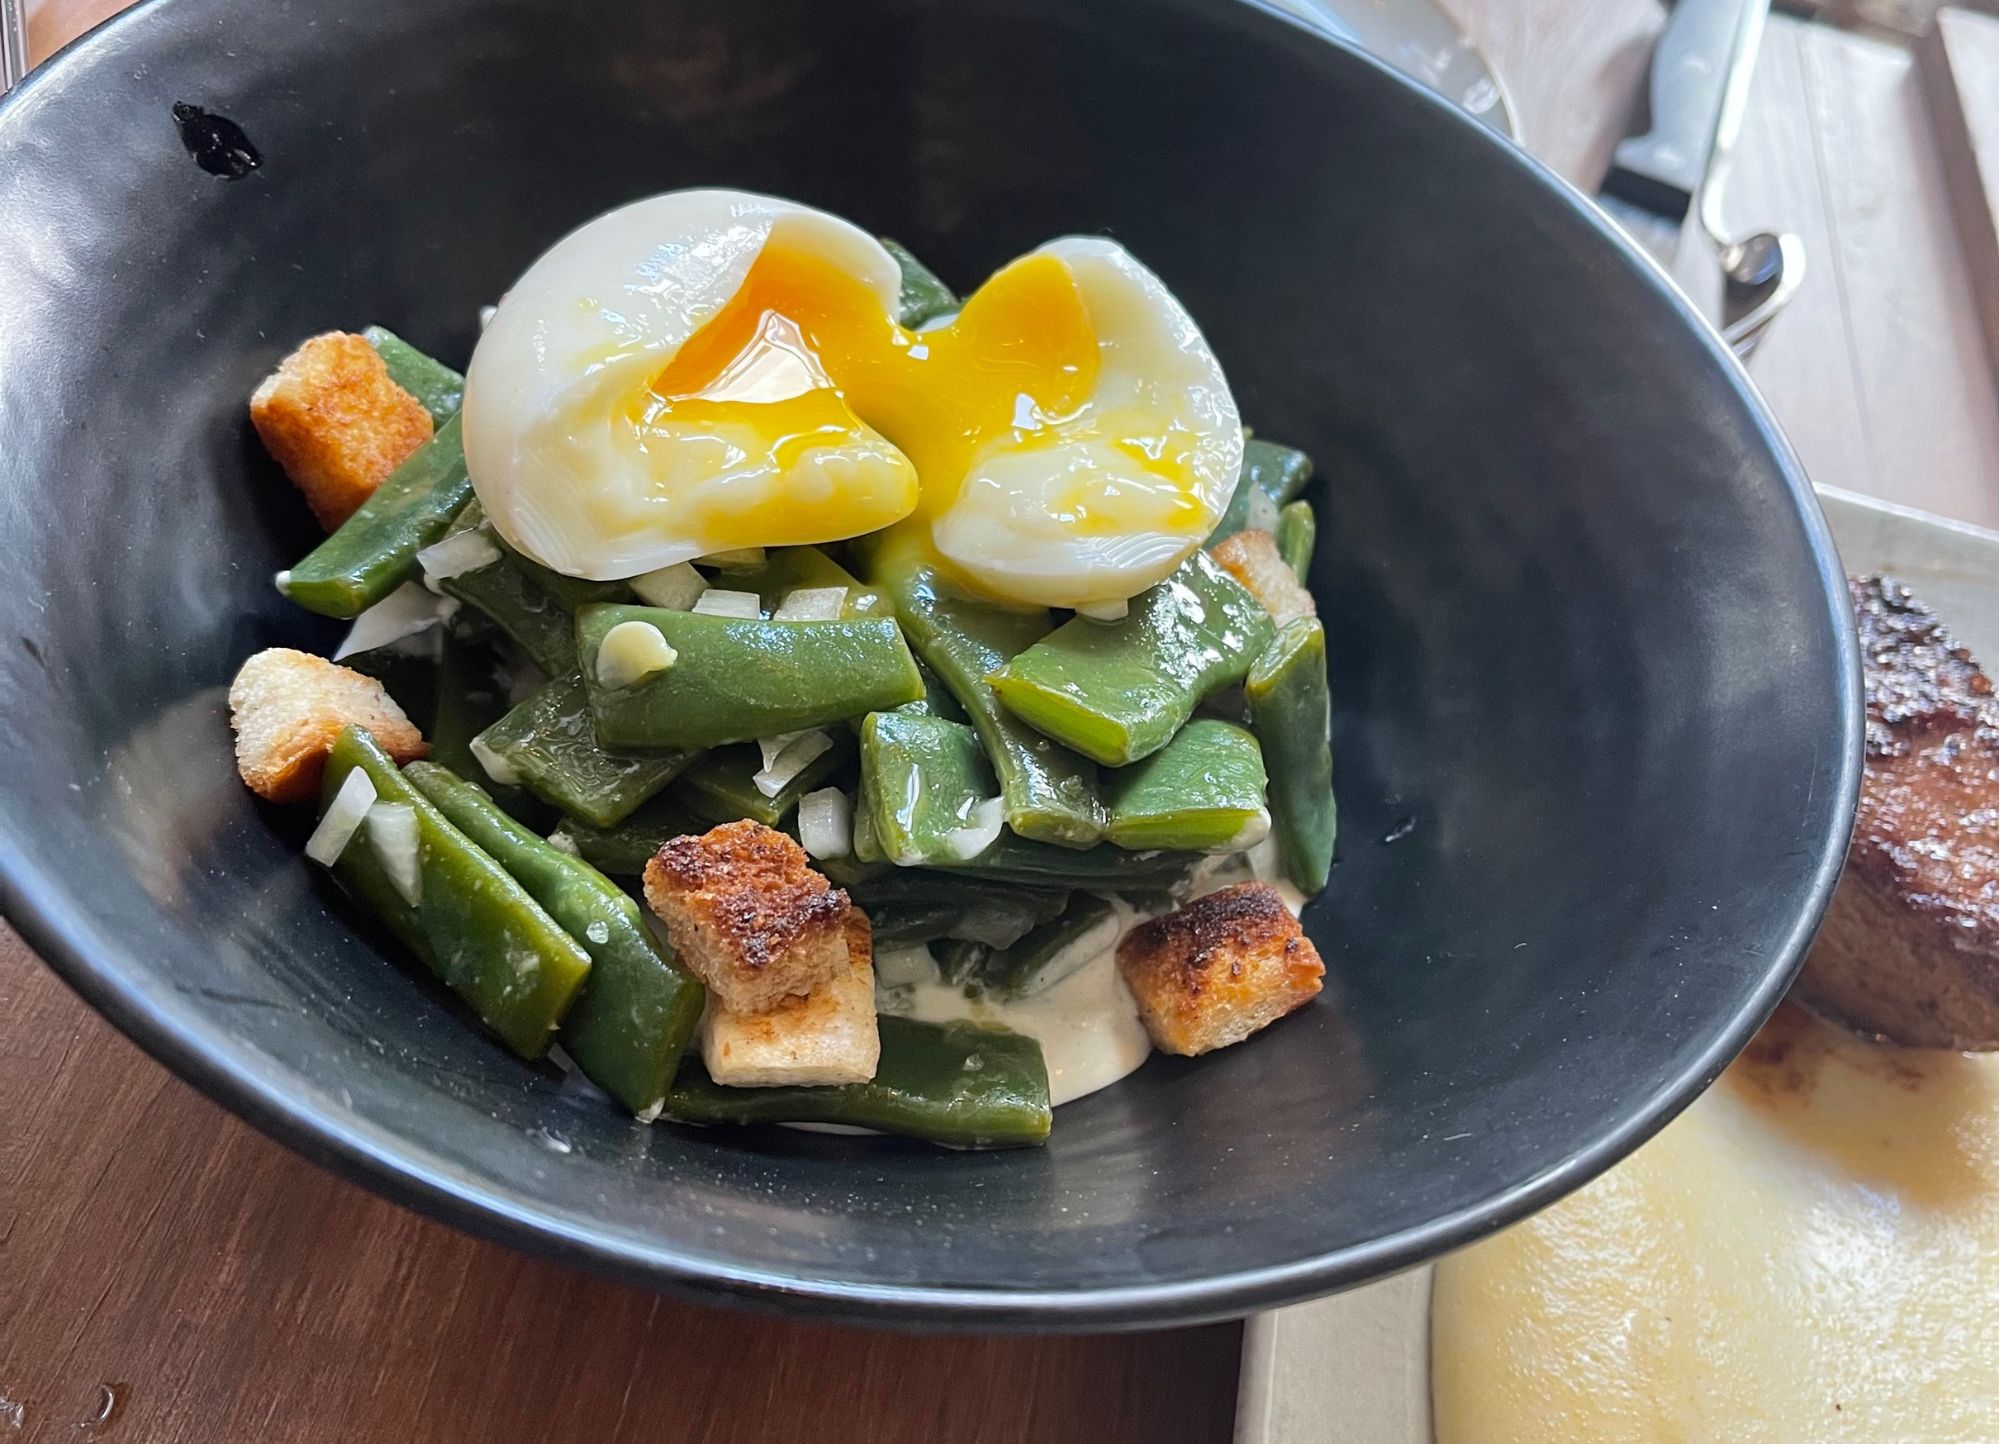 Green bean salad with sweet onion, egg and lemon vinaigrette with cottage cheese sauce